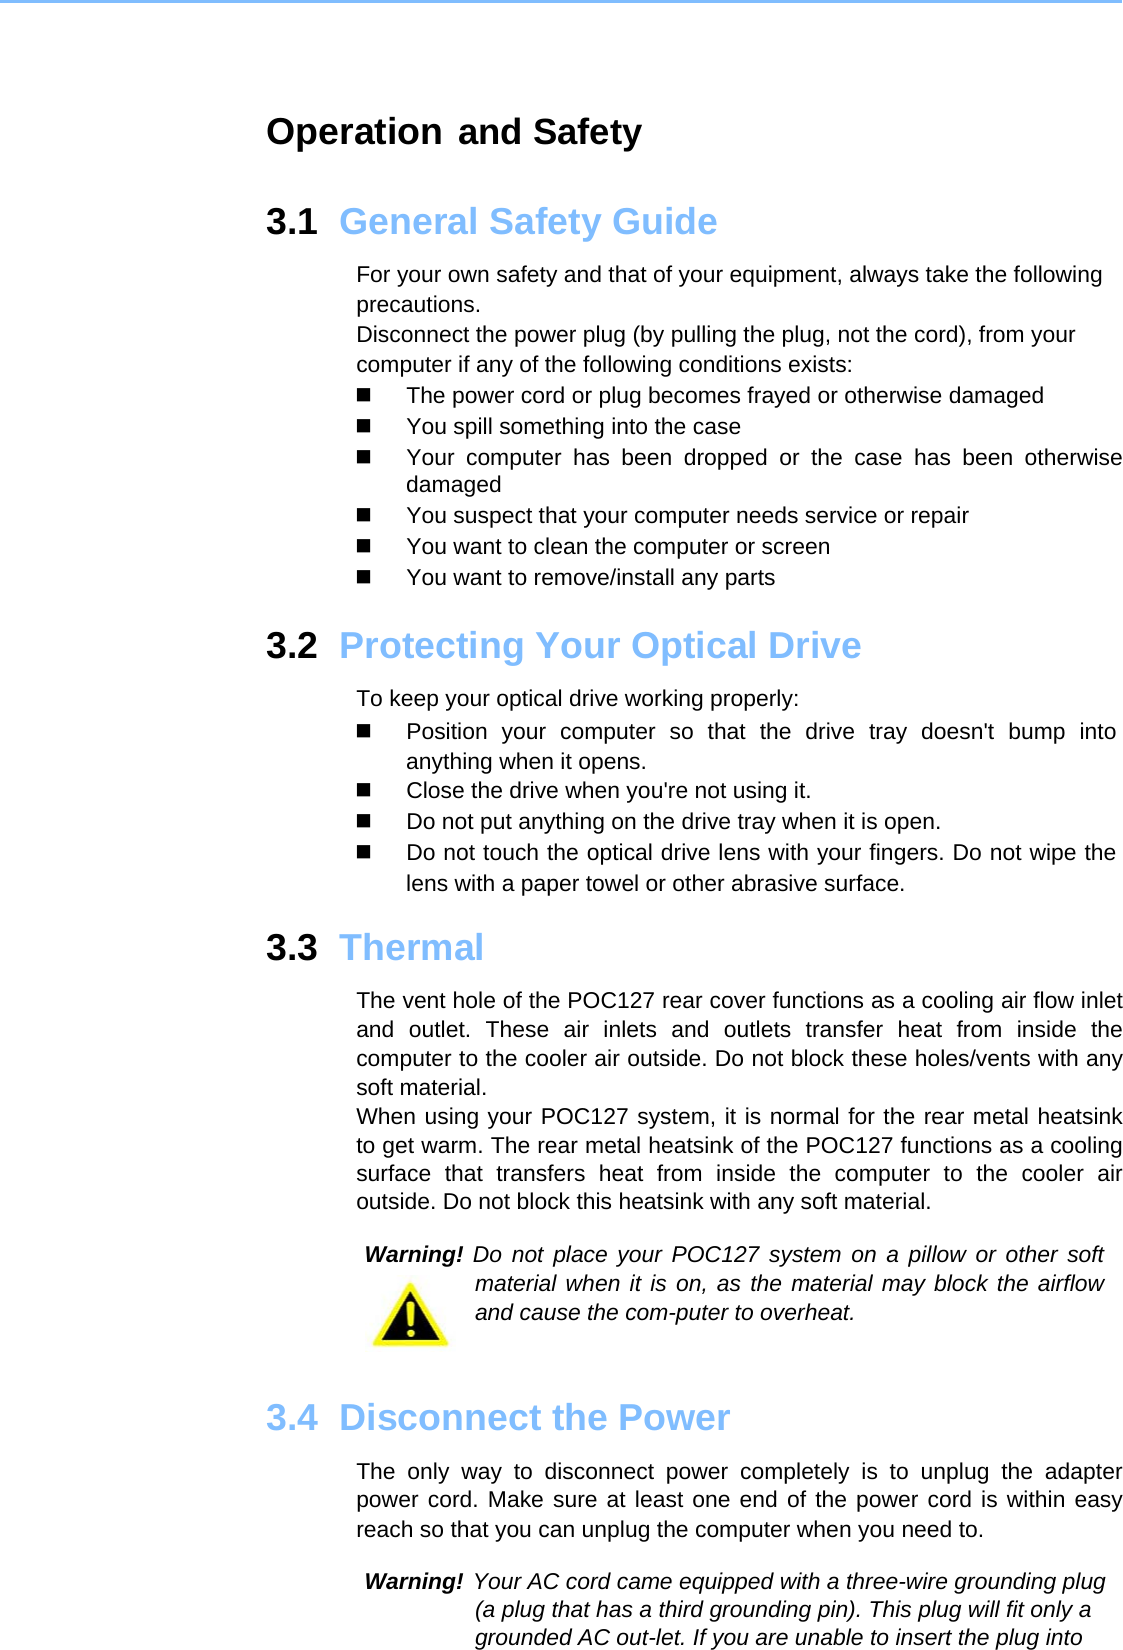    Operation and Safety  Information 3.1  General Safety Guide  For your own safety and that of your equipment, always take the following precautions.  Disconnect the power plug (by pulling the plug, not the cord), from your computer if any of the following conditions exists:    The power cord or plug becomes frayed or otherwise damaged     You spill something into the case     Your computer has been dropped or the case has been otherwise damaged     You suspect that your computer needs service or repair     You want to clean the computer or screen     You want to remove/install any parts   3.2  Protecting Your Optical Drive   To keep your optical drive working properly:    Position your computer so that the drive tray doesn&apos;t bump into anything when it opens.    Close the drive when you&apos;re not using it.     Do not put anything on the drive tray when it is open.     Do not touch the optical drive lens with your fingers. Do not wipe the lens with a paper towel or other abrasive surface.   3.3  Thermal   The vent hole of the POC127 rear cover functions as a cooling air flow inlet and outlet. These air inlets and outlets transfer heat from inside the computer to the cooler air outside. Do not block these holes/vents with any soft material.  When using your POC127 system, it is normal for the rear metal heatsink to get warm. The rear metal heatsink of the POC127 functions as a cooling surface that transfers heat from inside the computer to the cooler air outside. Do not block this heatsink with any soft material.  Warning! Do not place your POC127 system on a pillow or other soft material when it is on, as the material may block the airflow and cause the com-puter to overheat.    3.4  Disconnect the Power  The only way to disconnect power completely is to unplug the adapter power cord. Make sure at least one end of the power cord is within easy reach so that you can unplug the computer when you need to.  Warning! Your AC cord came equipped with a three-wire grounding plug (a plug that has a third grounding pin). This plug will fit only a grounded AC out-let. If you are unable to insert the plug into 